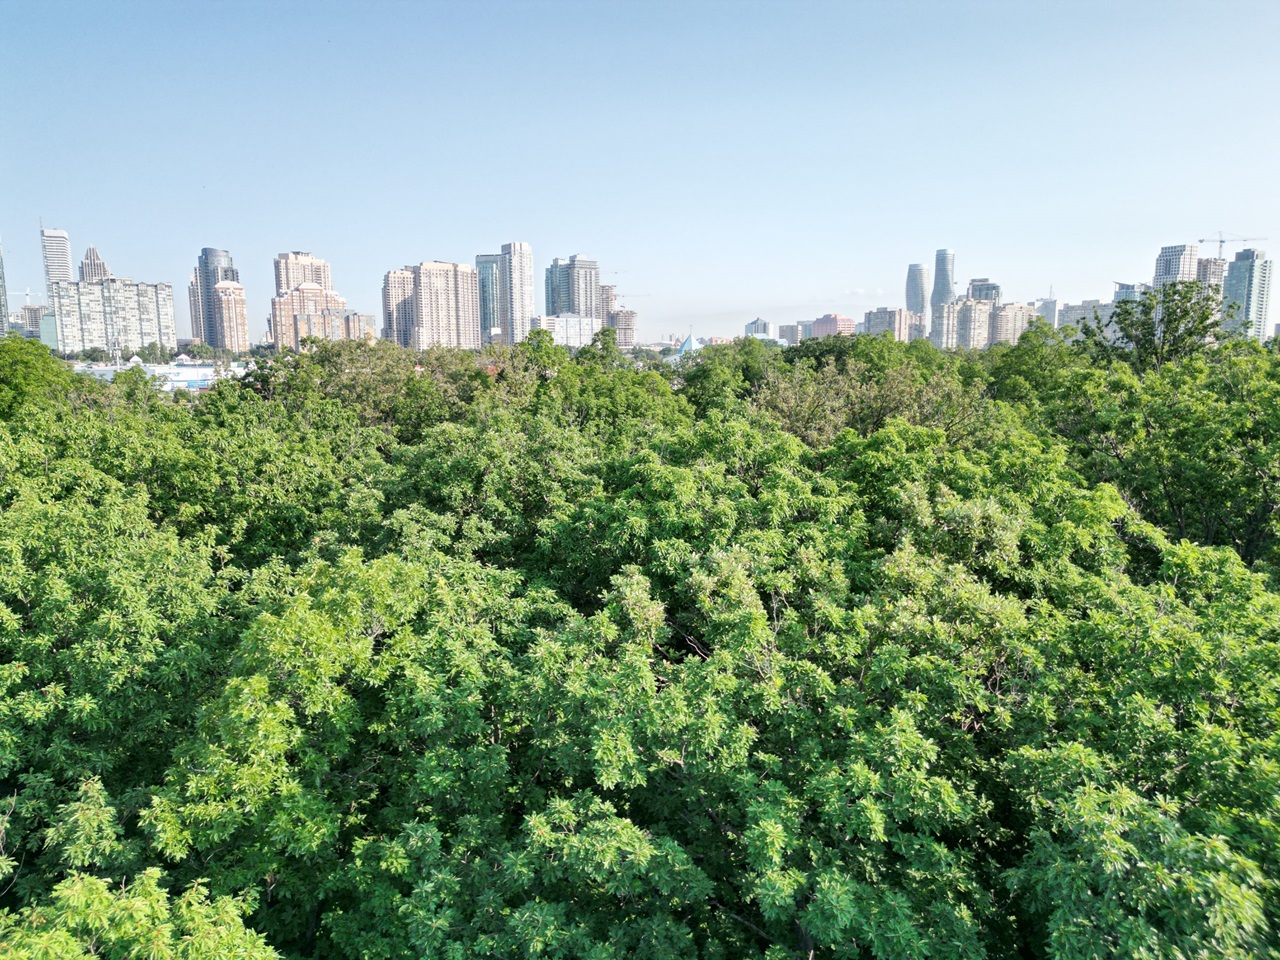 Mississauga and its many trees.